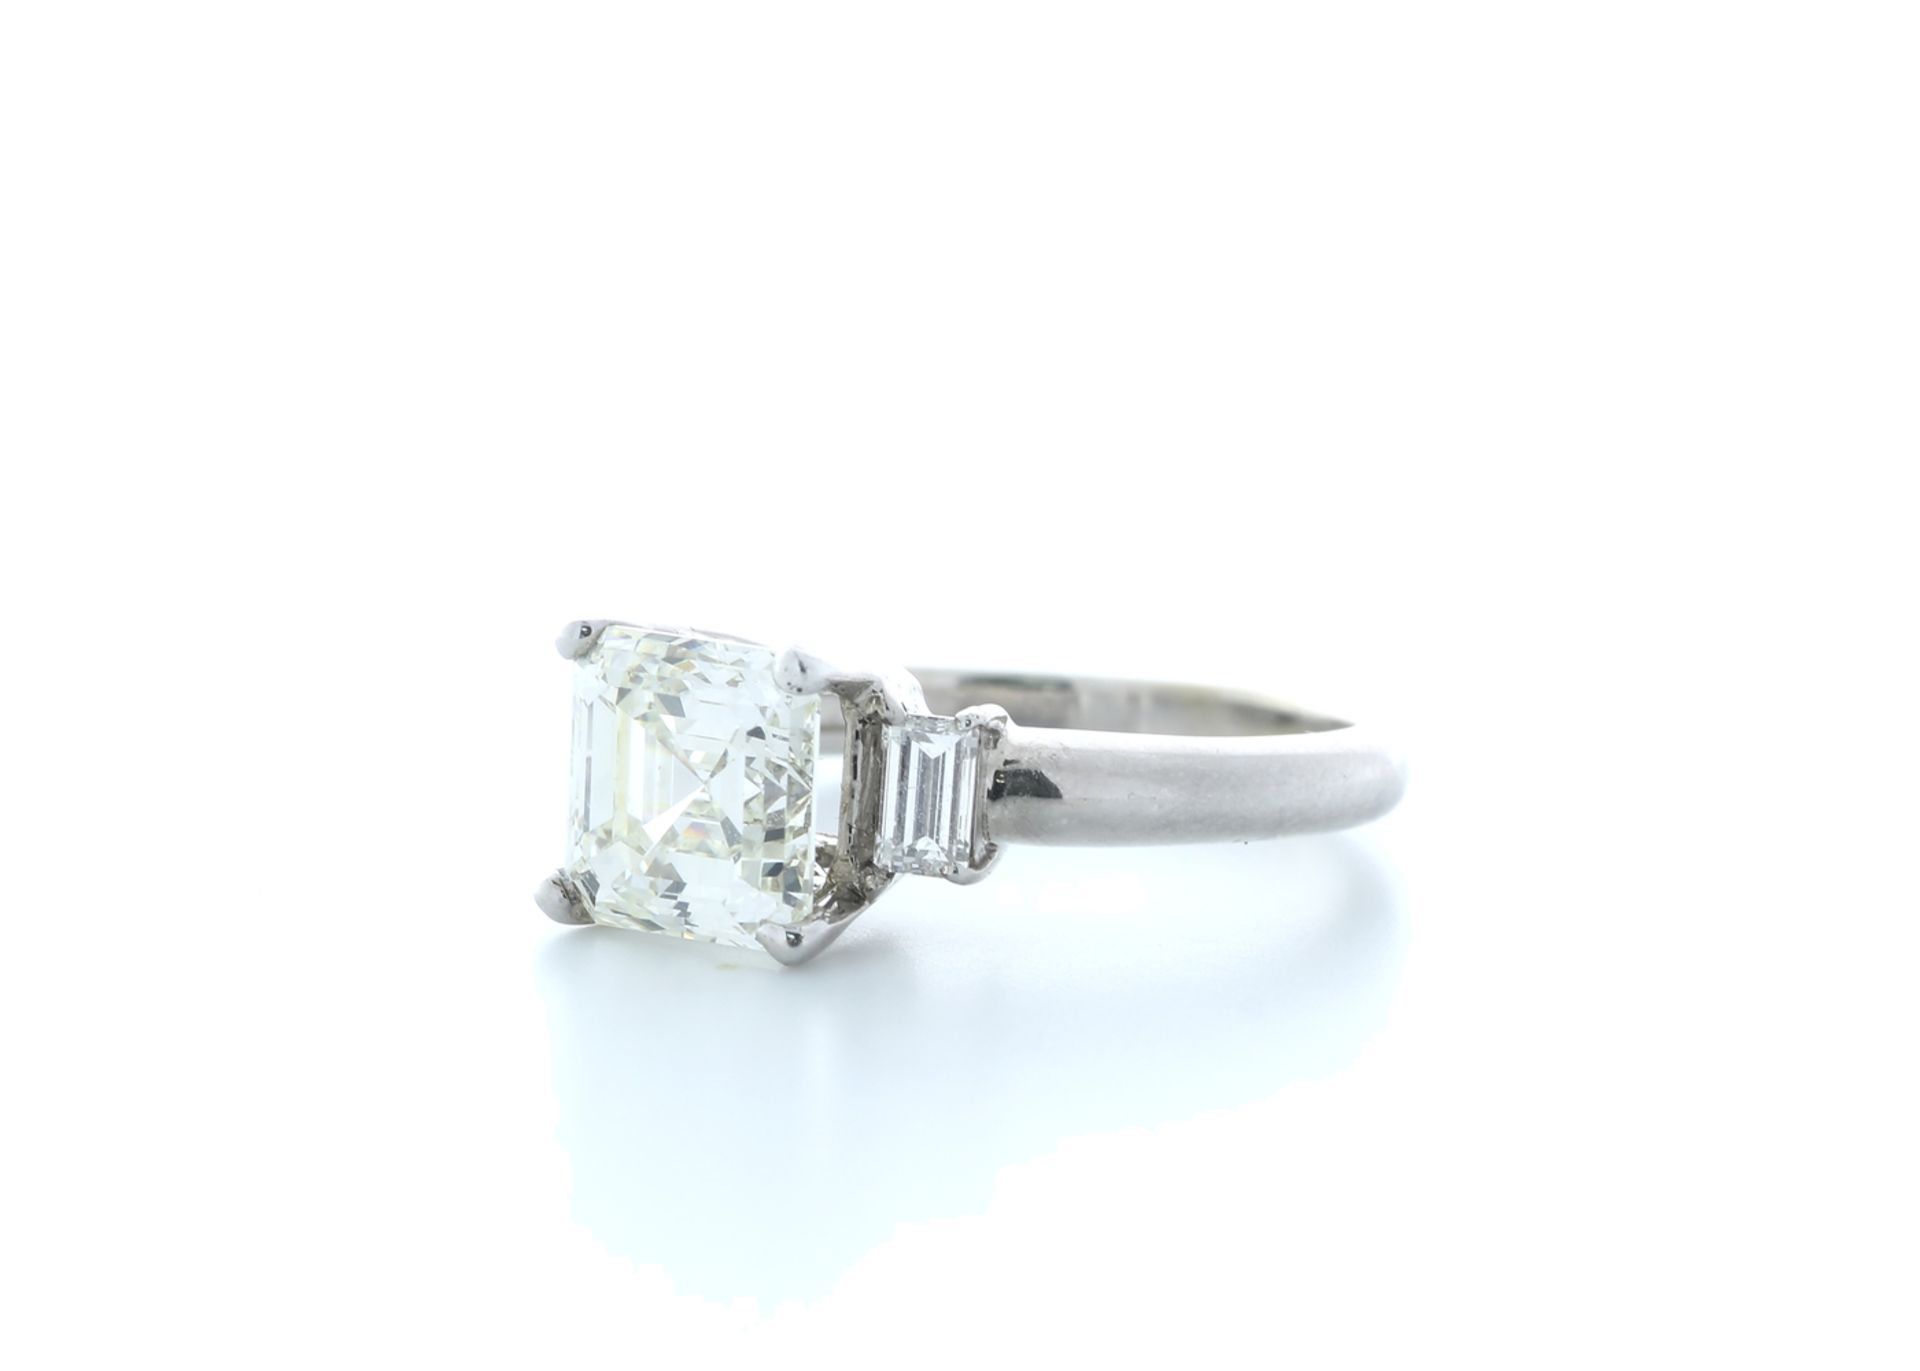 18ct White Gold Three Stone Claw Set Diamond Ring 3.11(2.70) Carats - Valued by IDI £93,500.00 - - Image 2 of 5